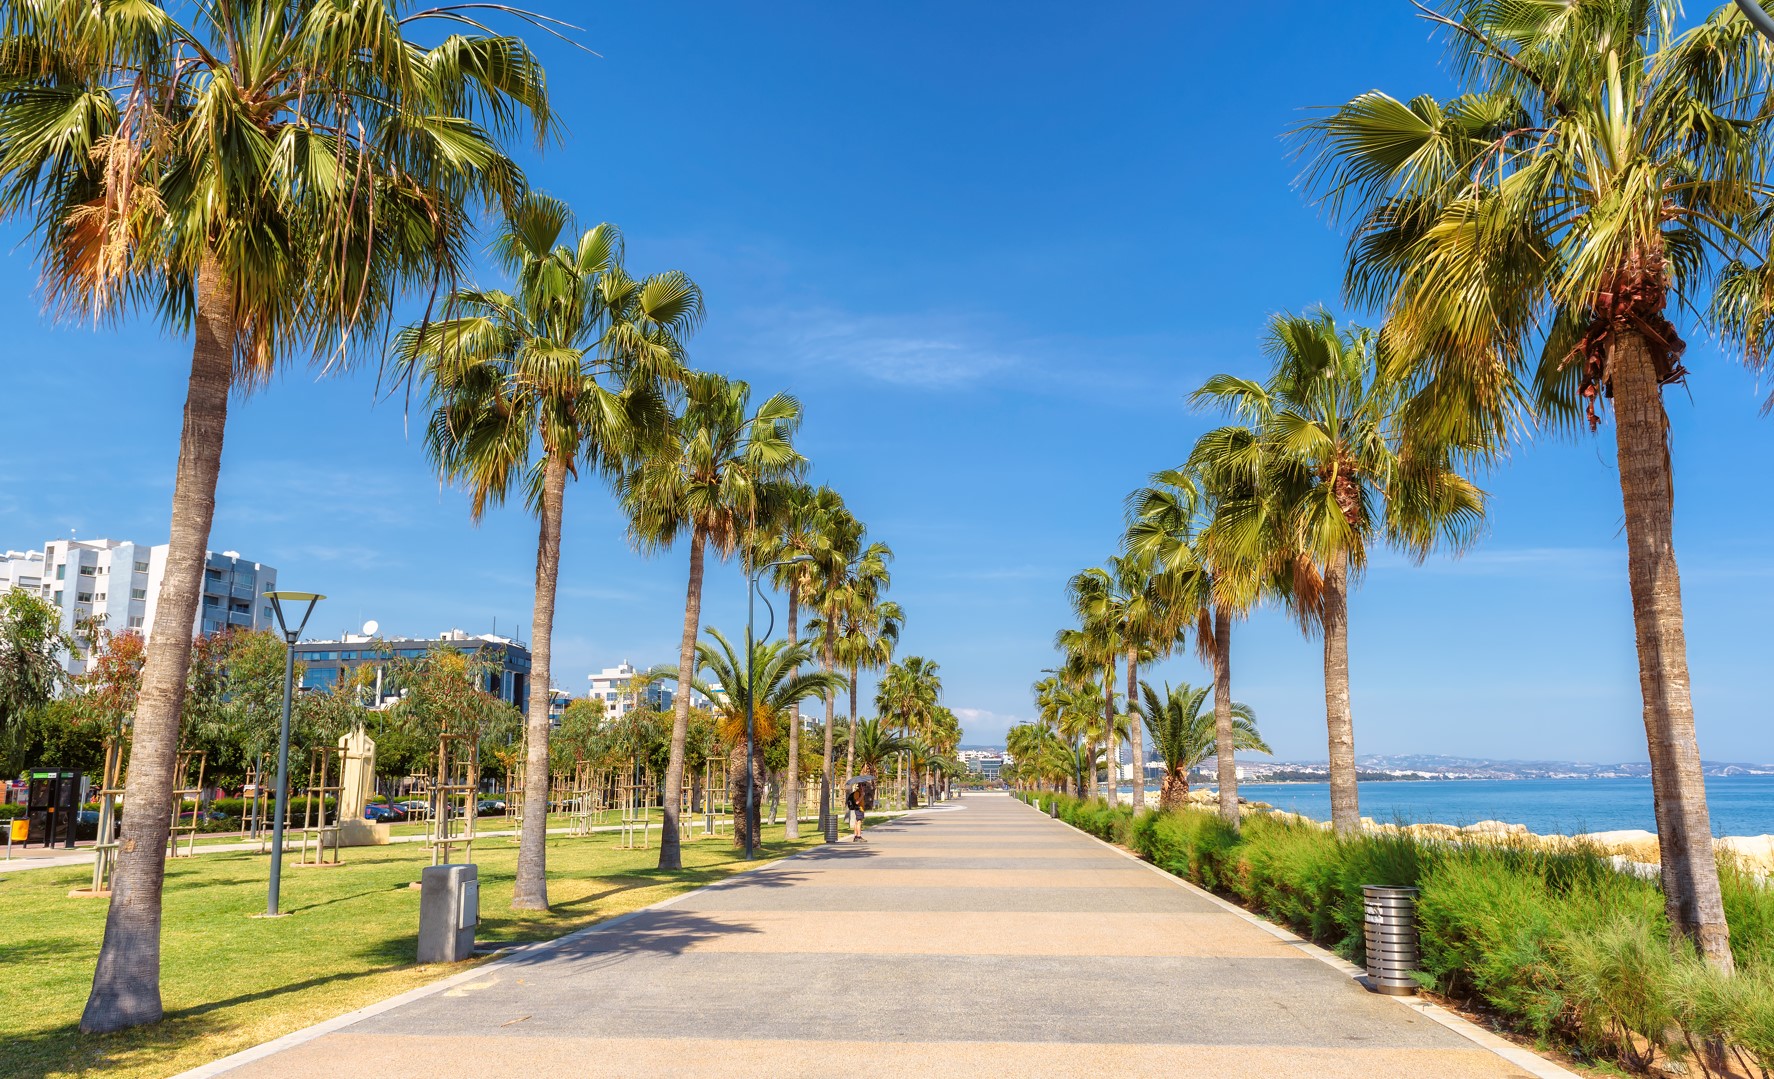 Explore Limassol sights, local food and hotels